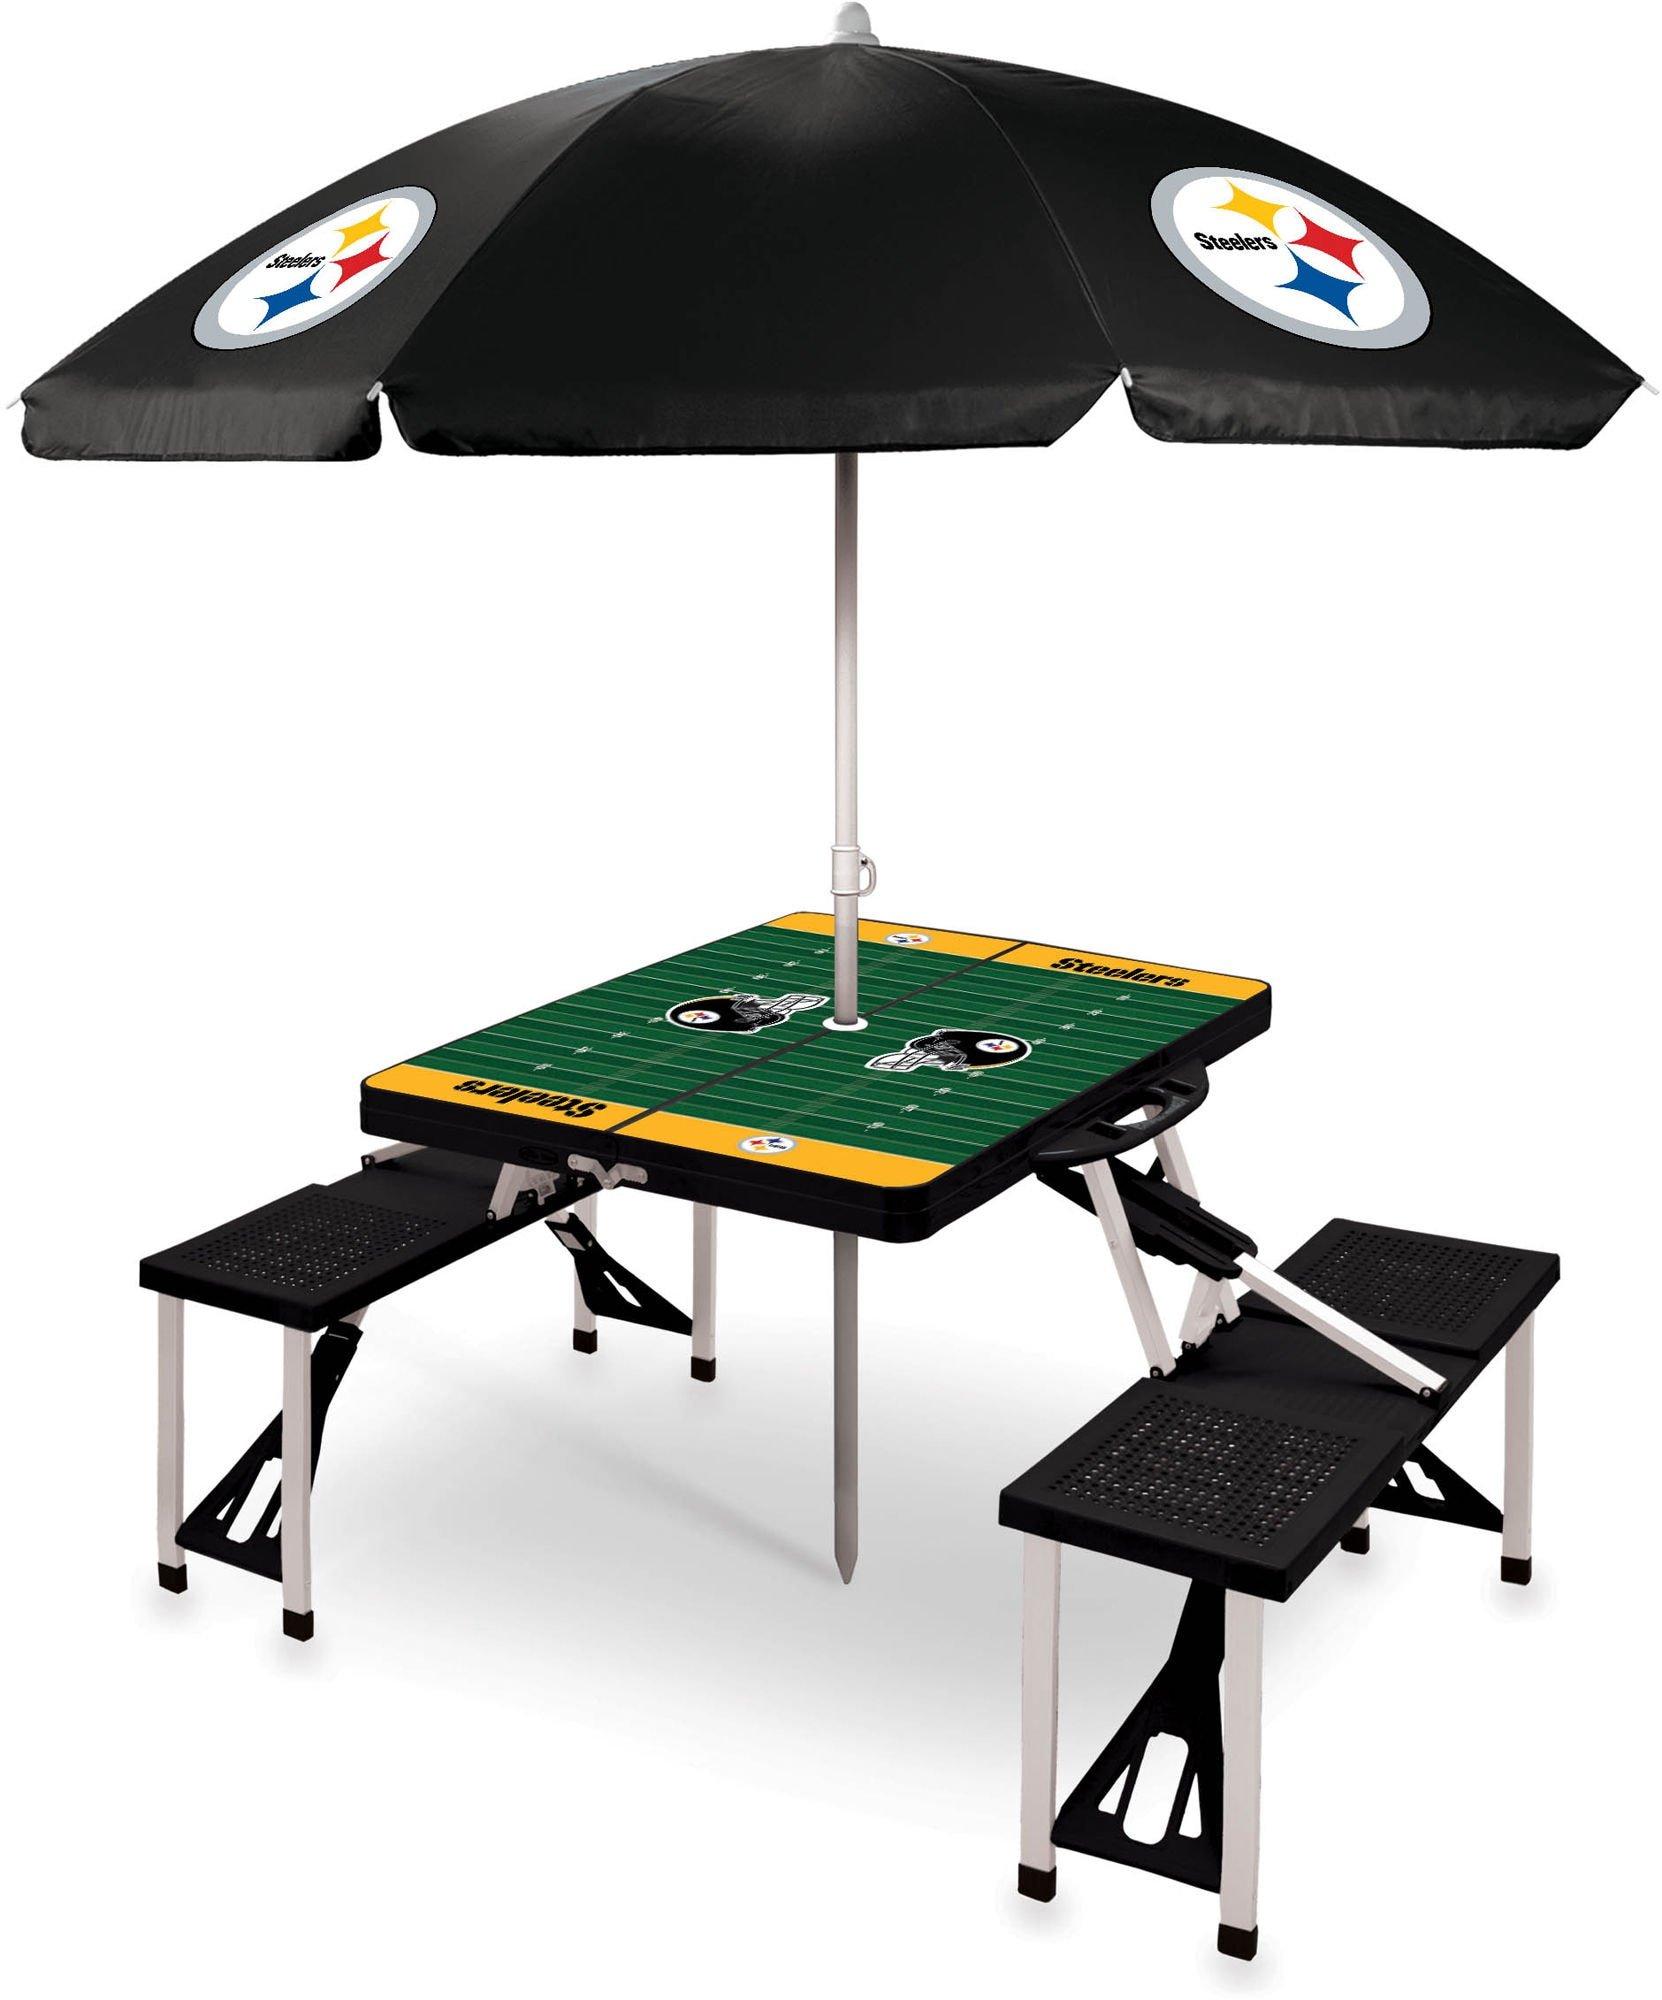 Pittsburgh Steelers Picnic Table and Umbrella